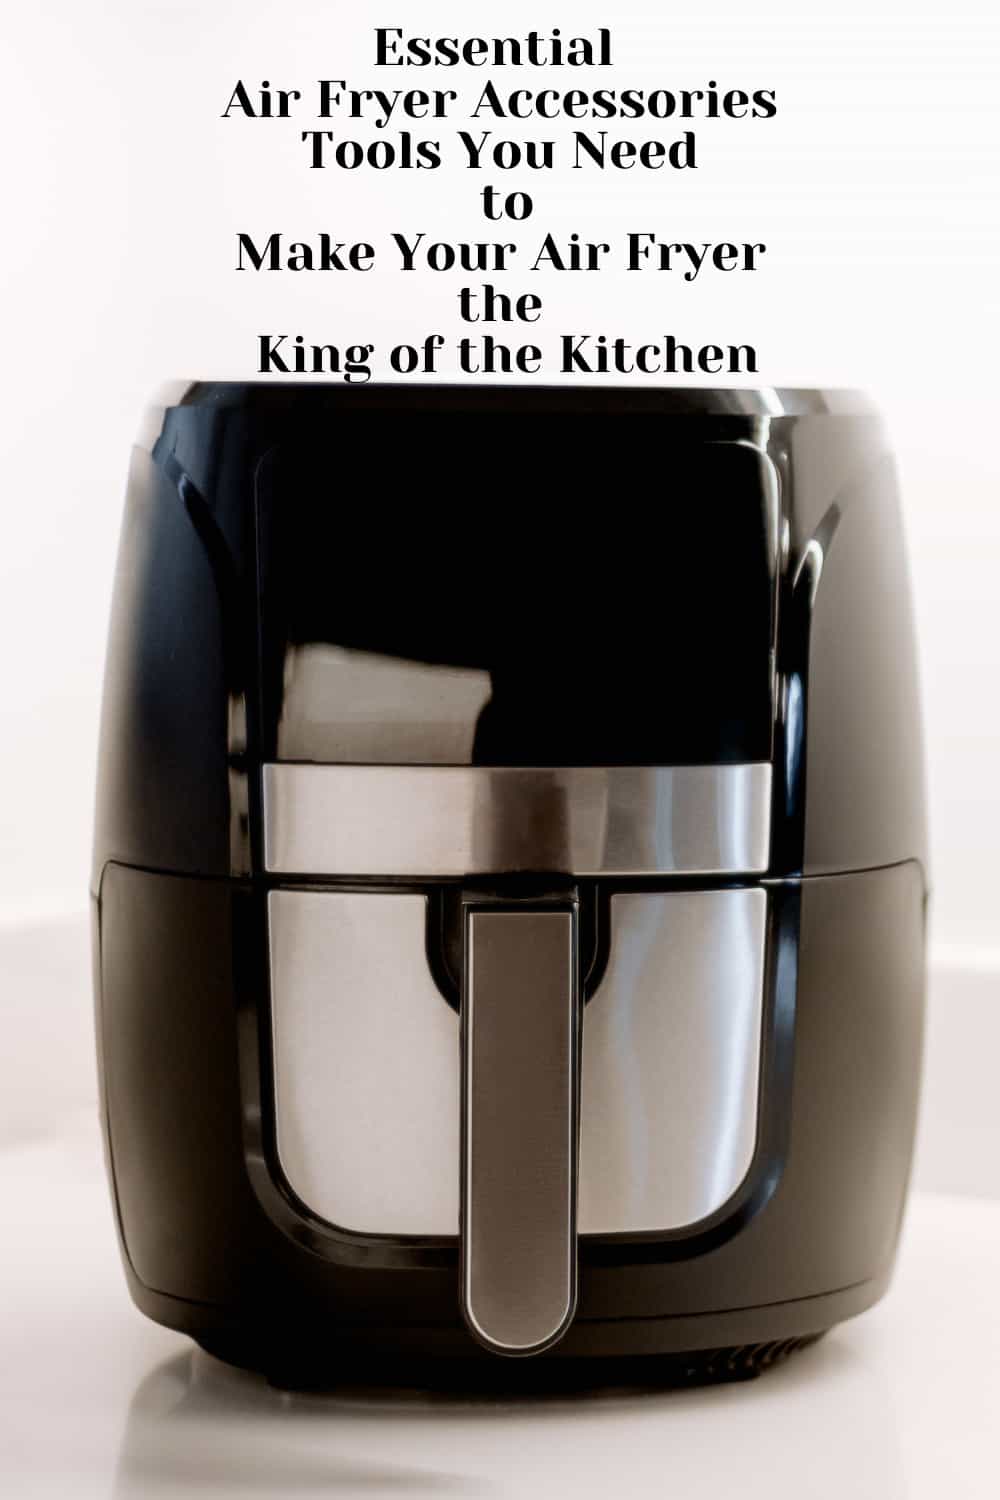 Essential air fryer accessories you need to make your air fryer king of the kitchen.